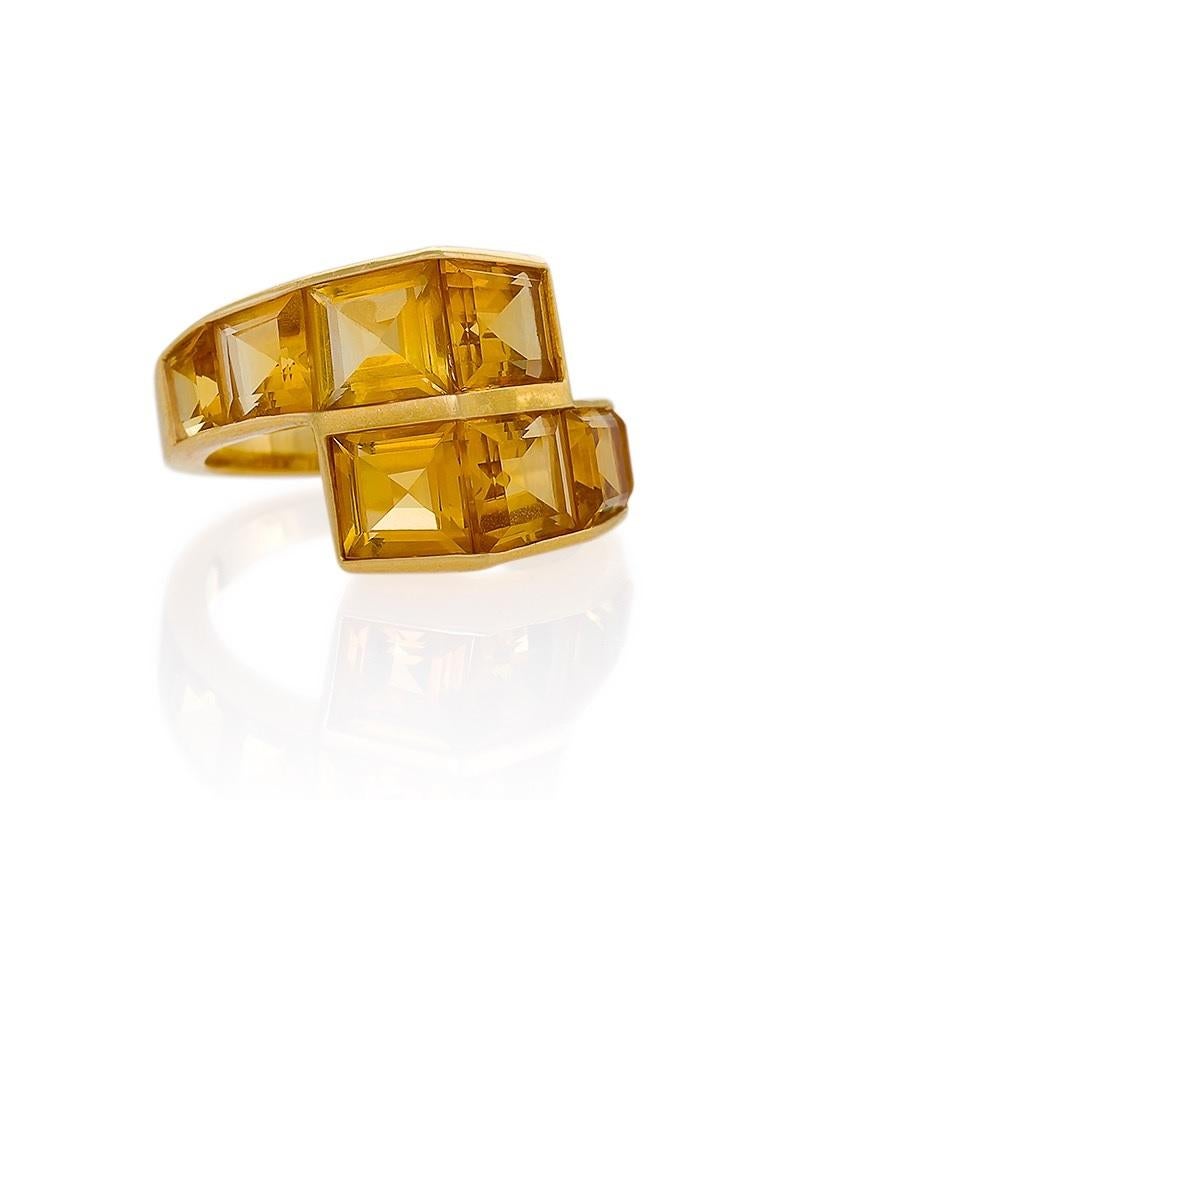 A Retro 18 karat gold ring with citrines. The ring has 8 square-cut citrines with an approximate total weight of 3.80 carats. The ring is designed in a dimensional crossover motif. Circa 1940's.

Ring size 6-1/2; this ring can be sized.